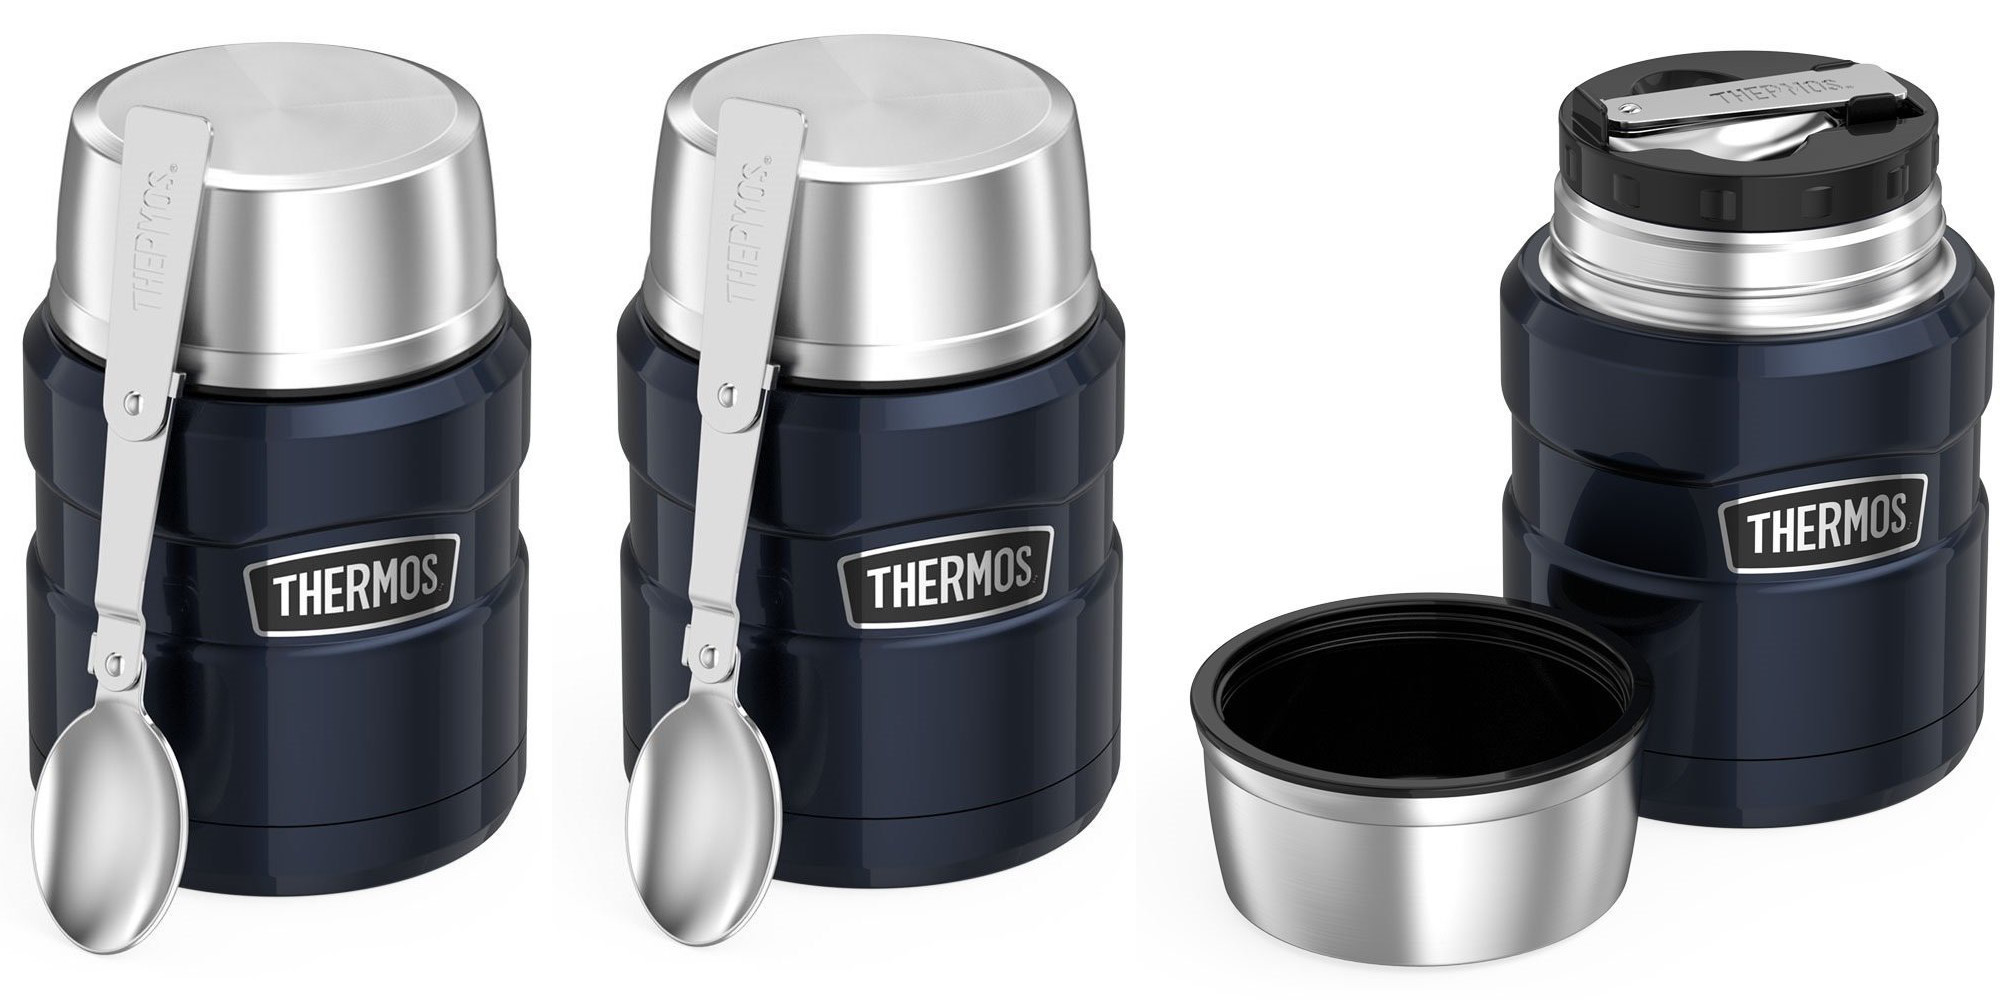 Thermos Stainless King Food Jar + Folding Spoon for $16.50 (Reg. $24+)